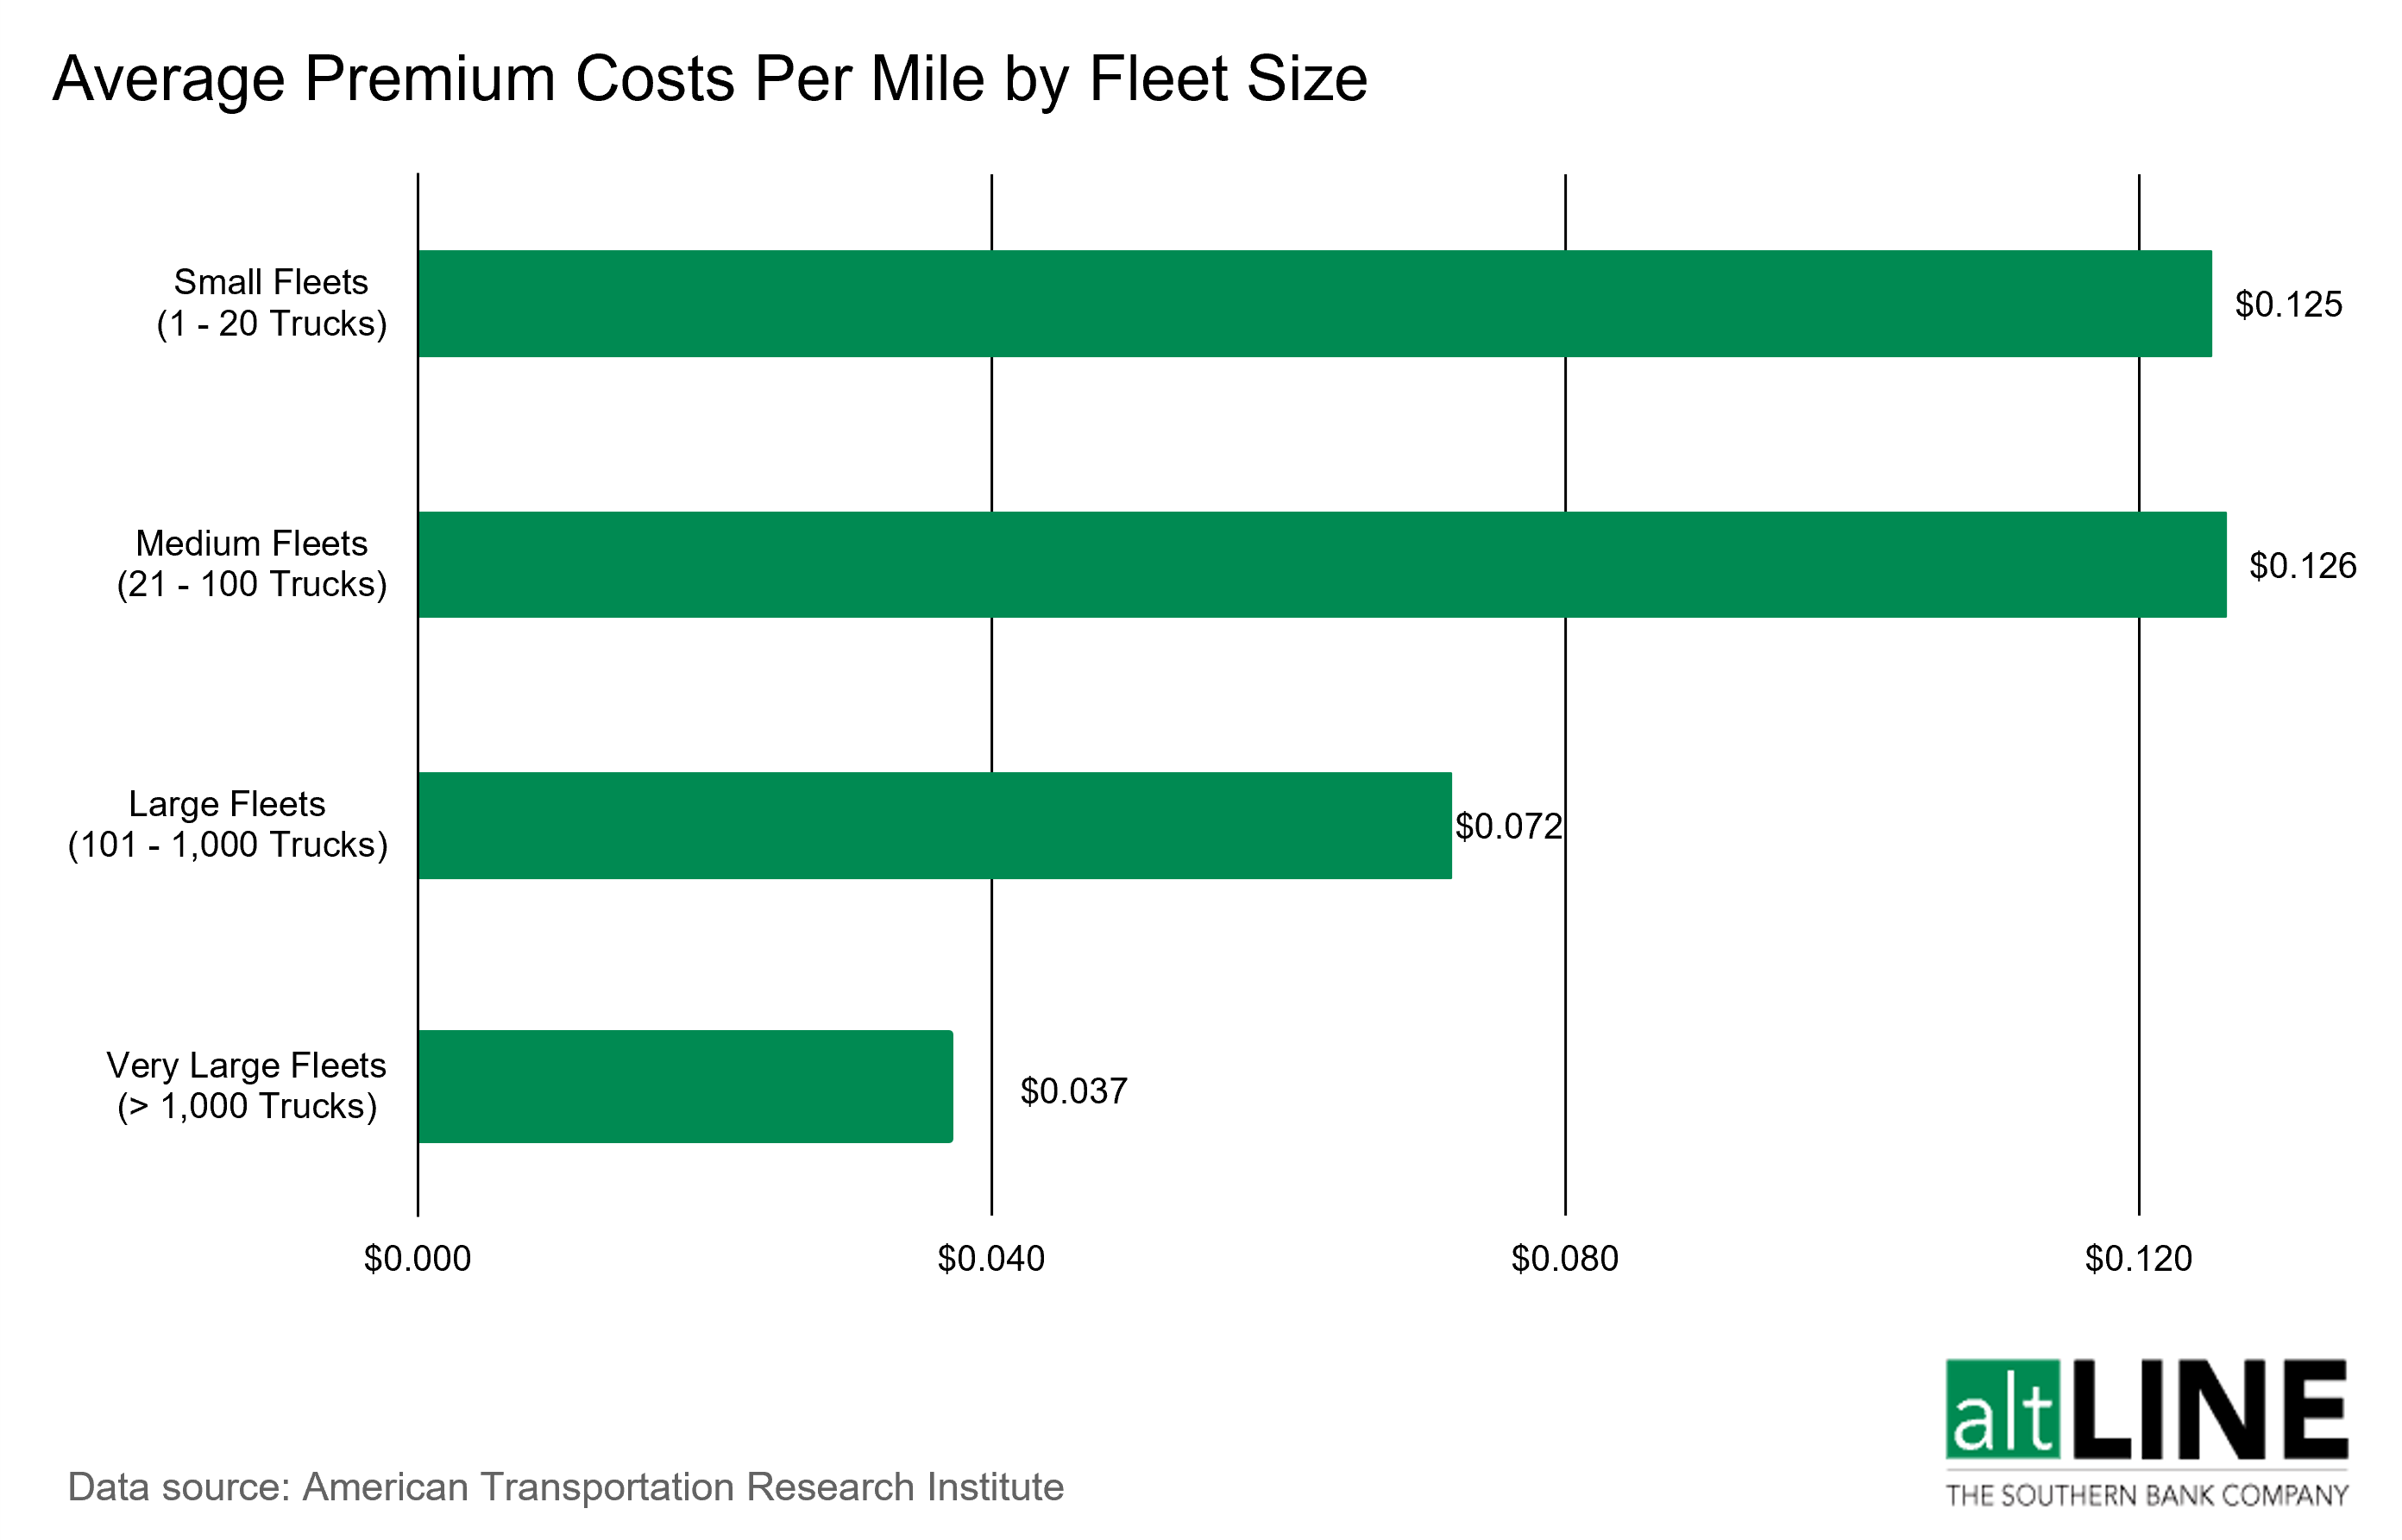 chart showing the average premium costs per mile by fleet size